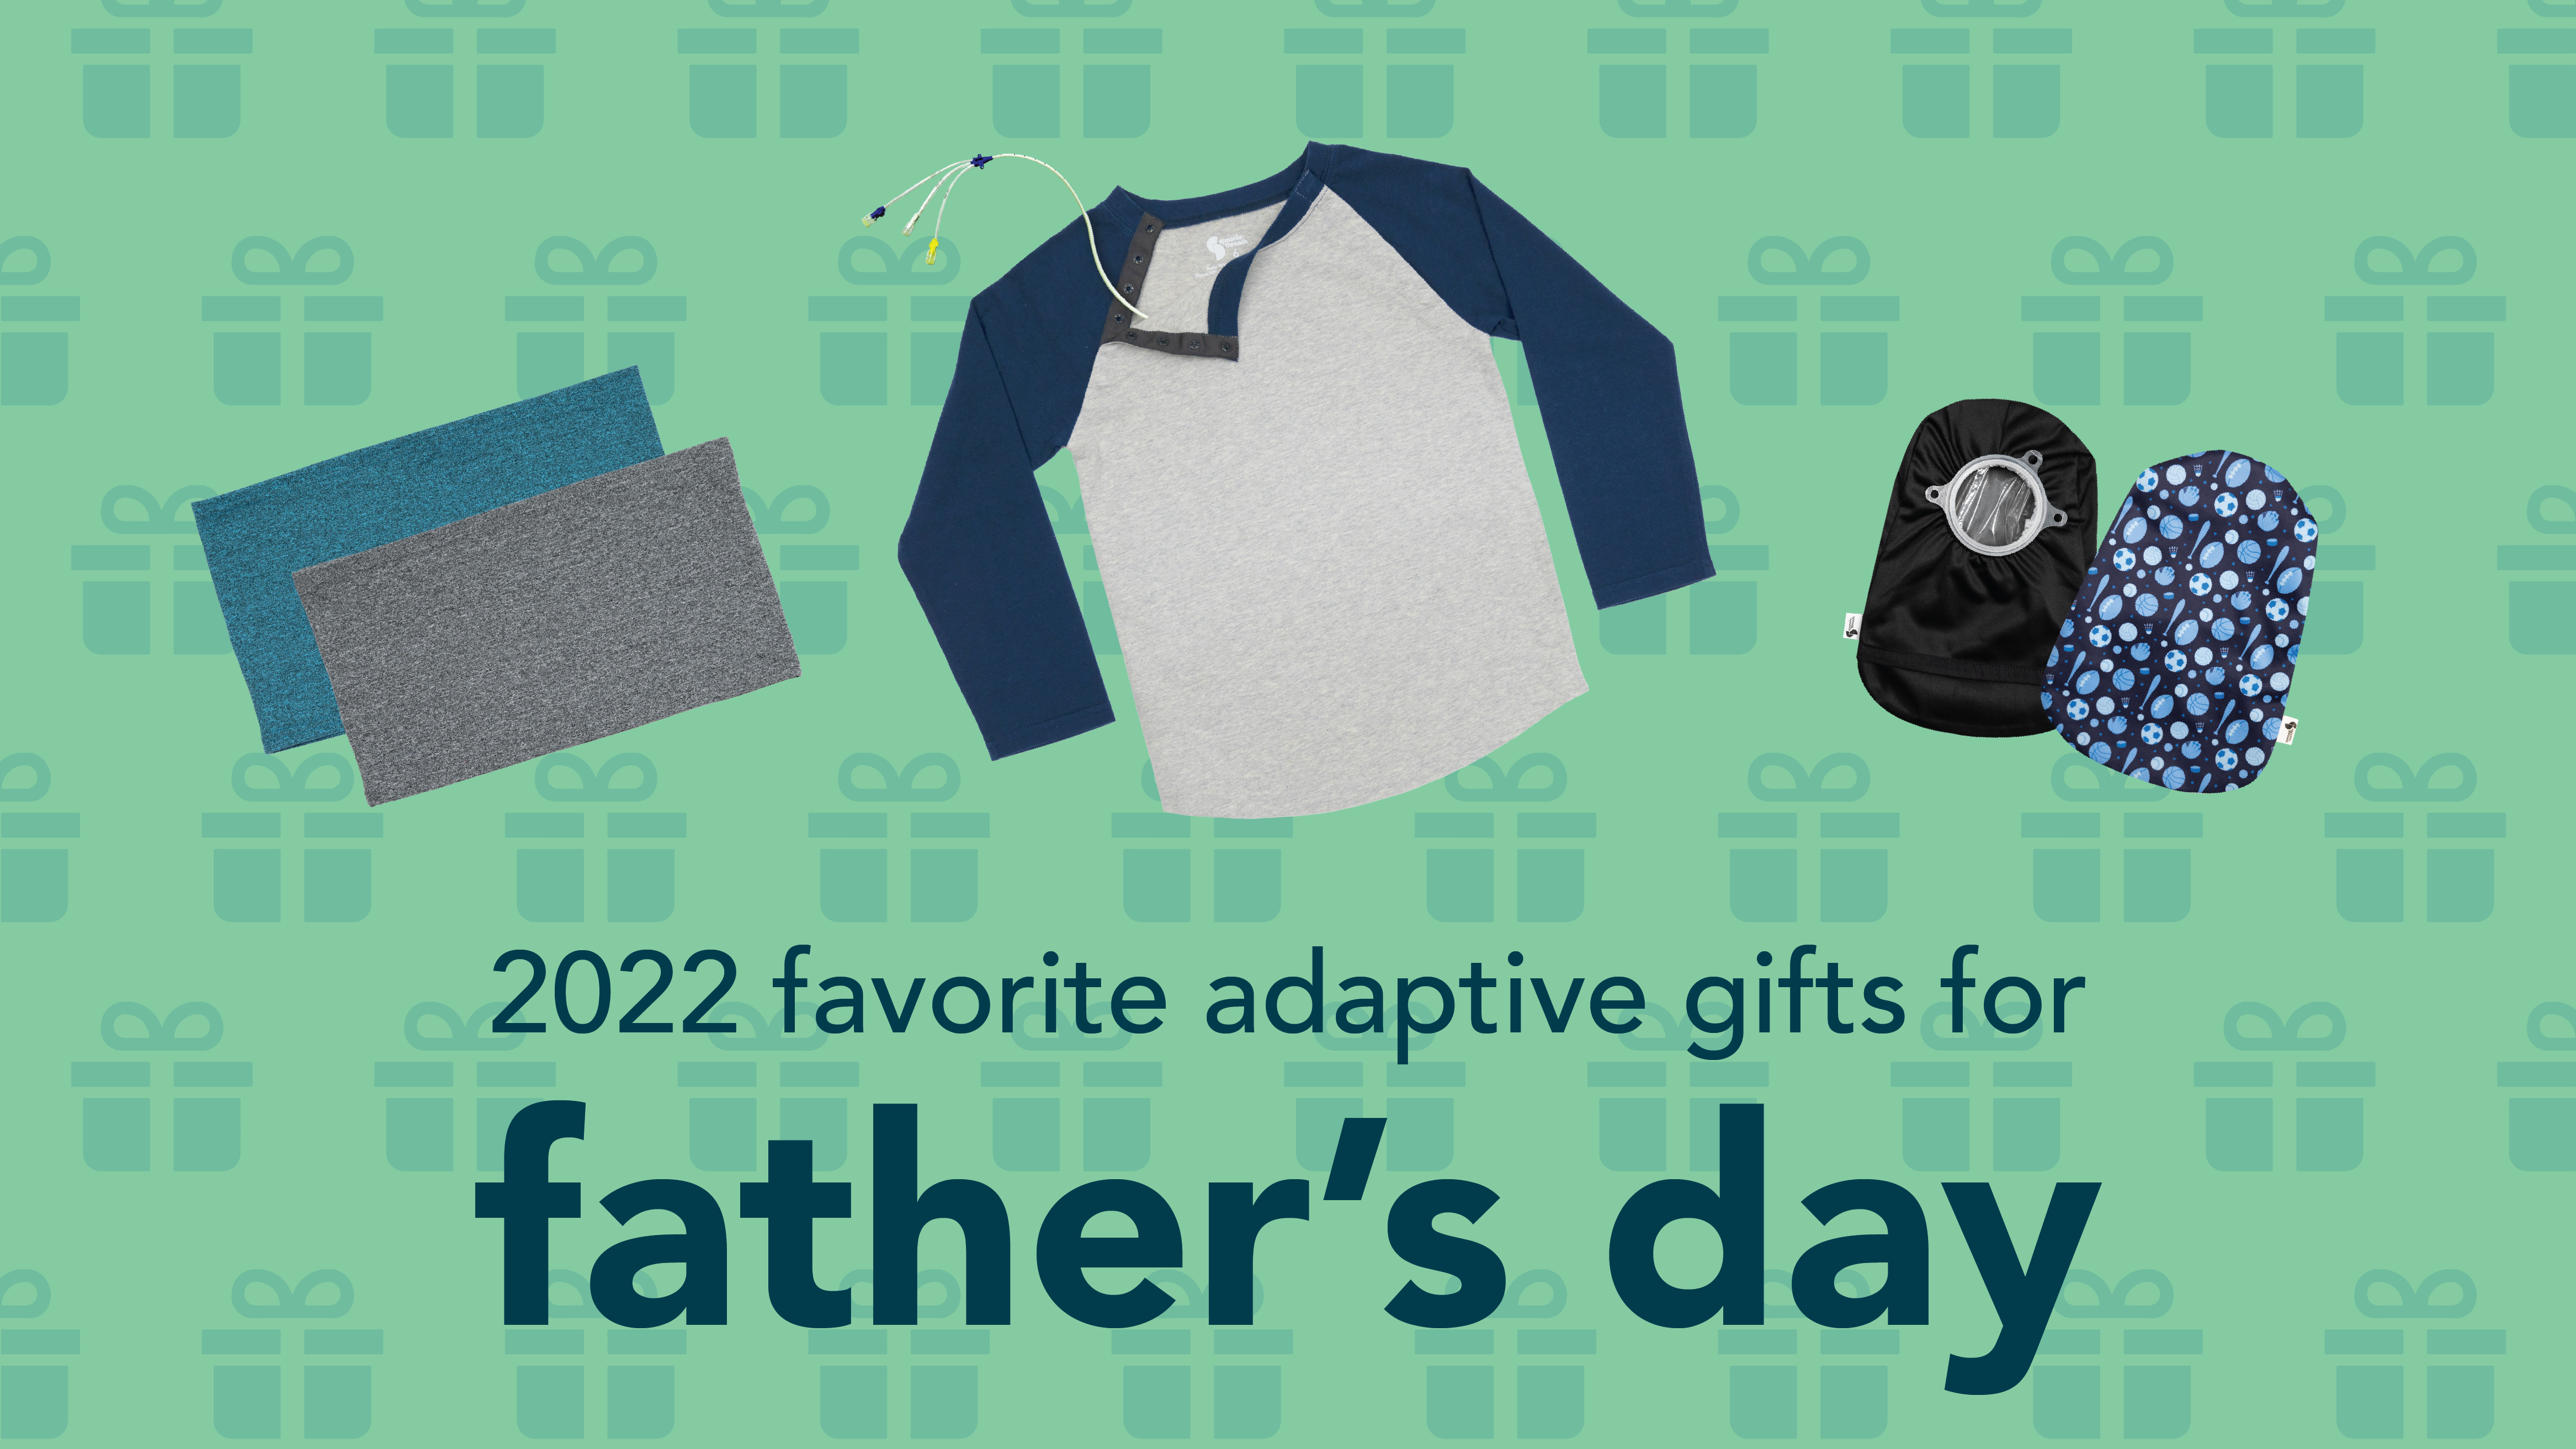 2022 Favorite Adaptive Gifts for Father's Day